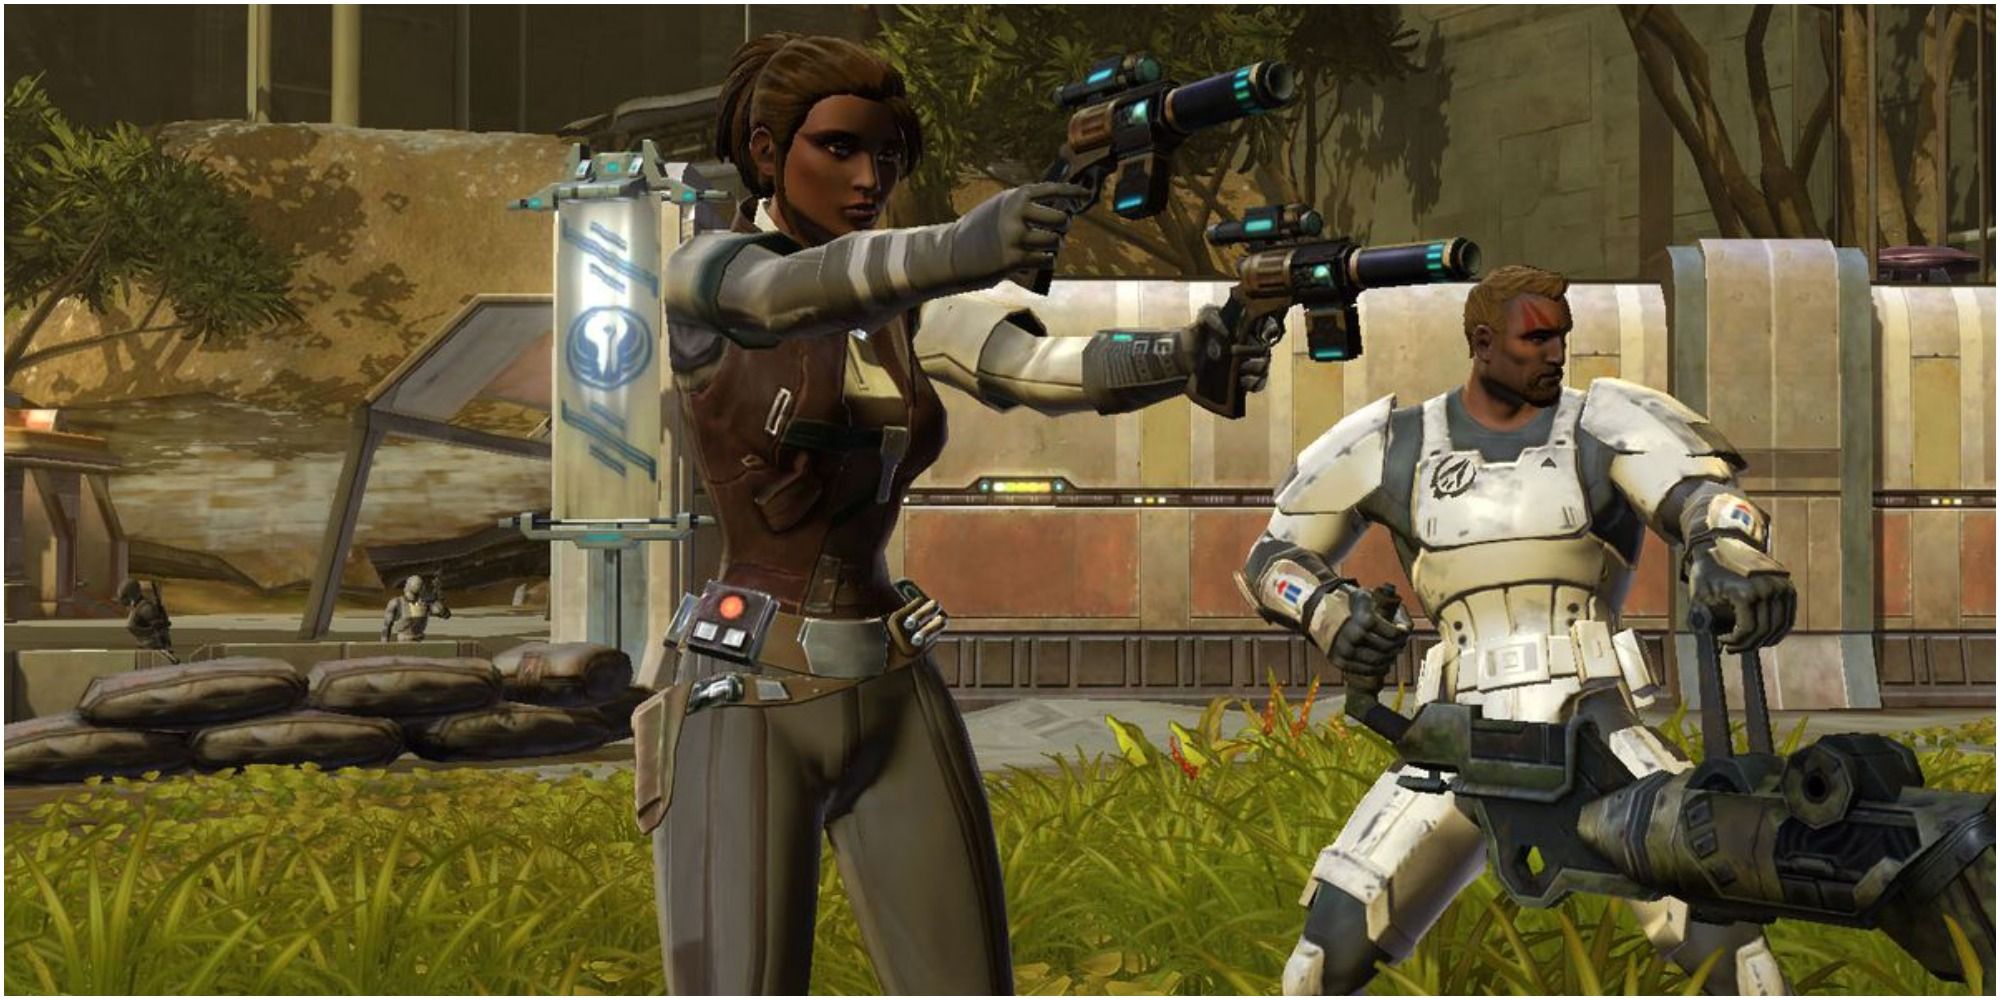 Two characters holding weapons in Star Wars Old Republic